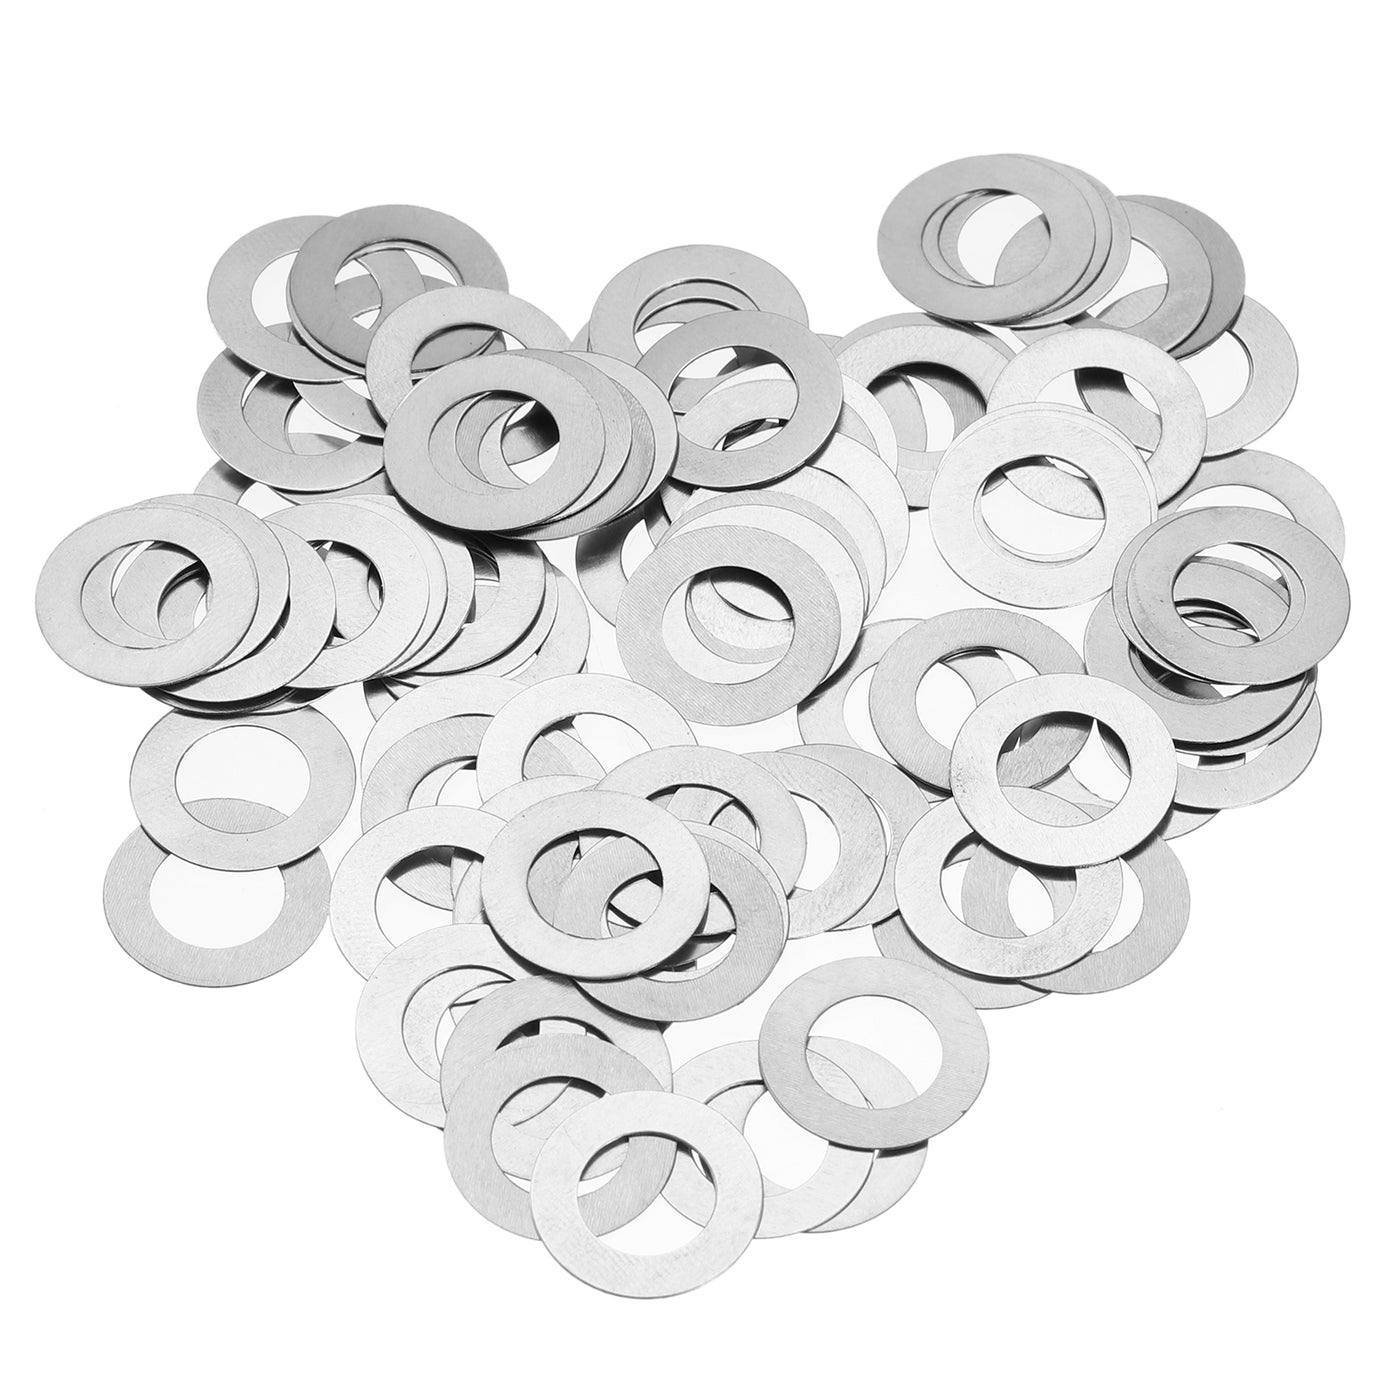 uxcell Uxcell M8 304 Stainless Steel Flat Washers, 100pcs 8x14x0.5mm Ultra Thin Flat Spacers